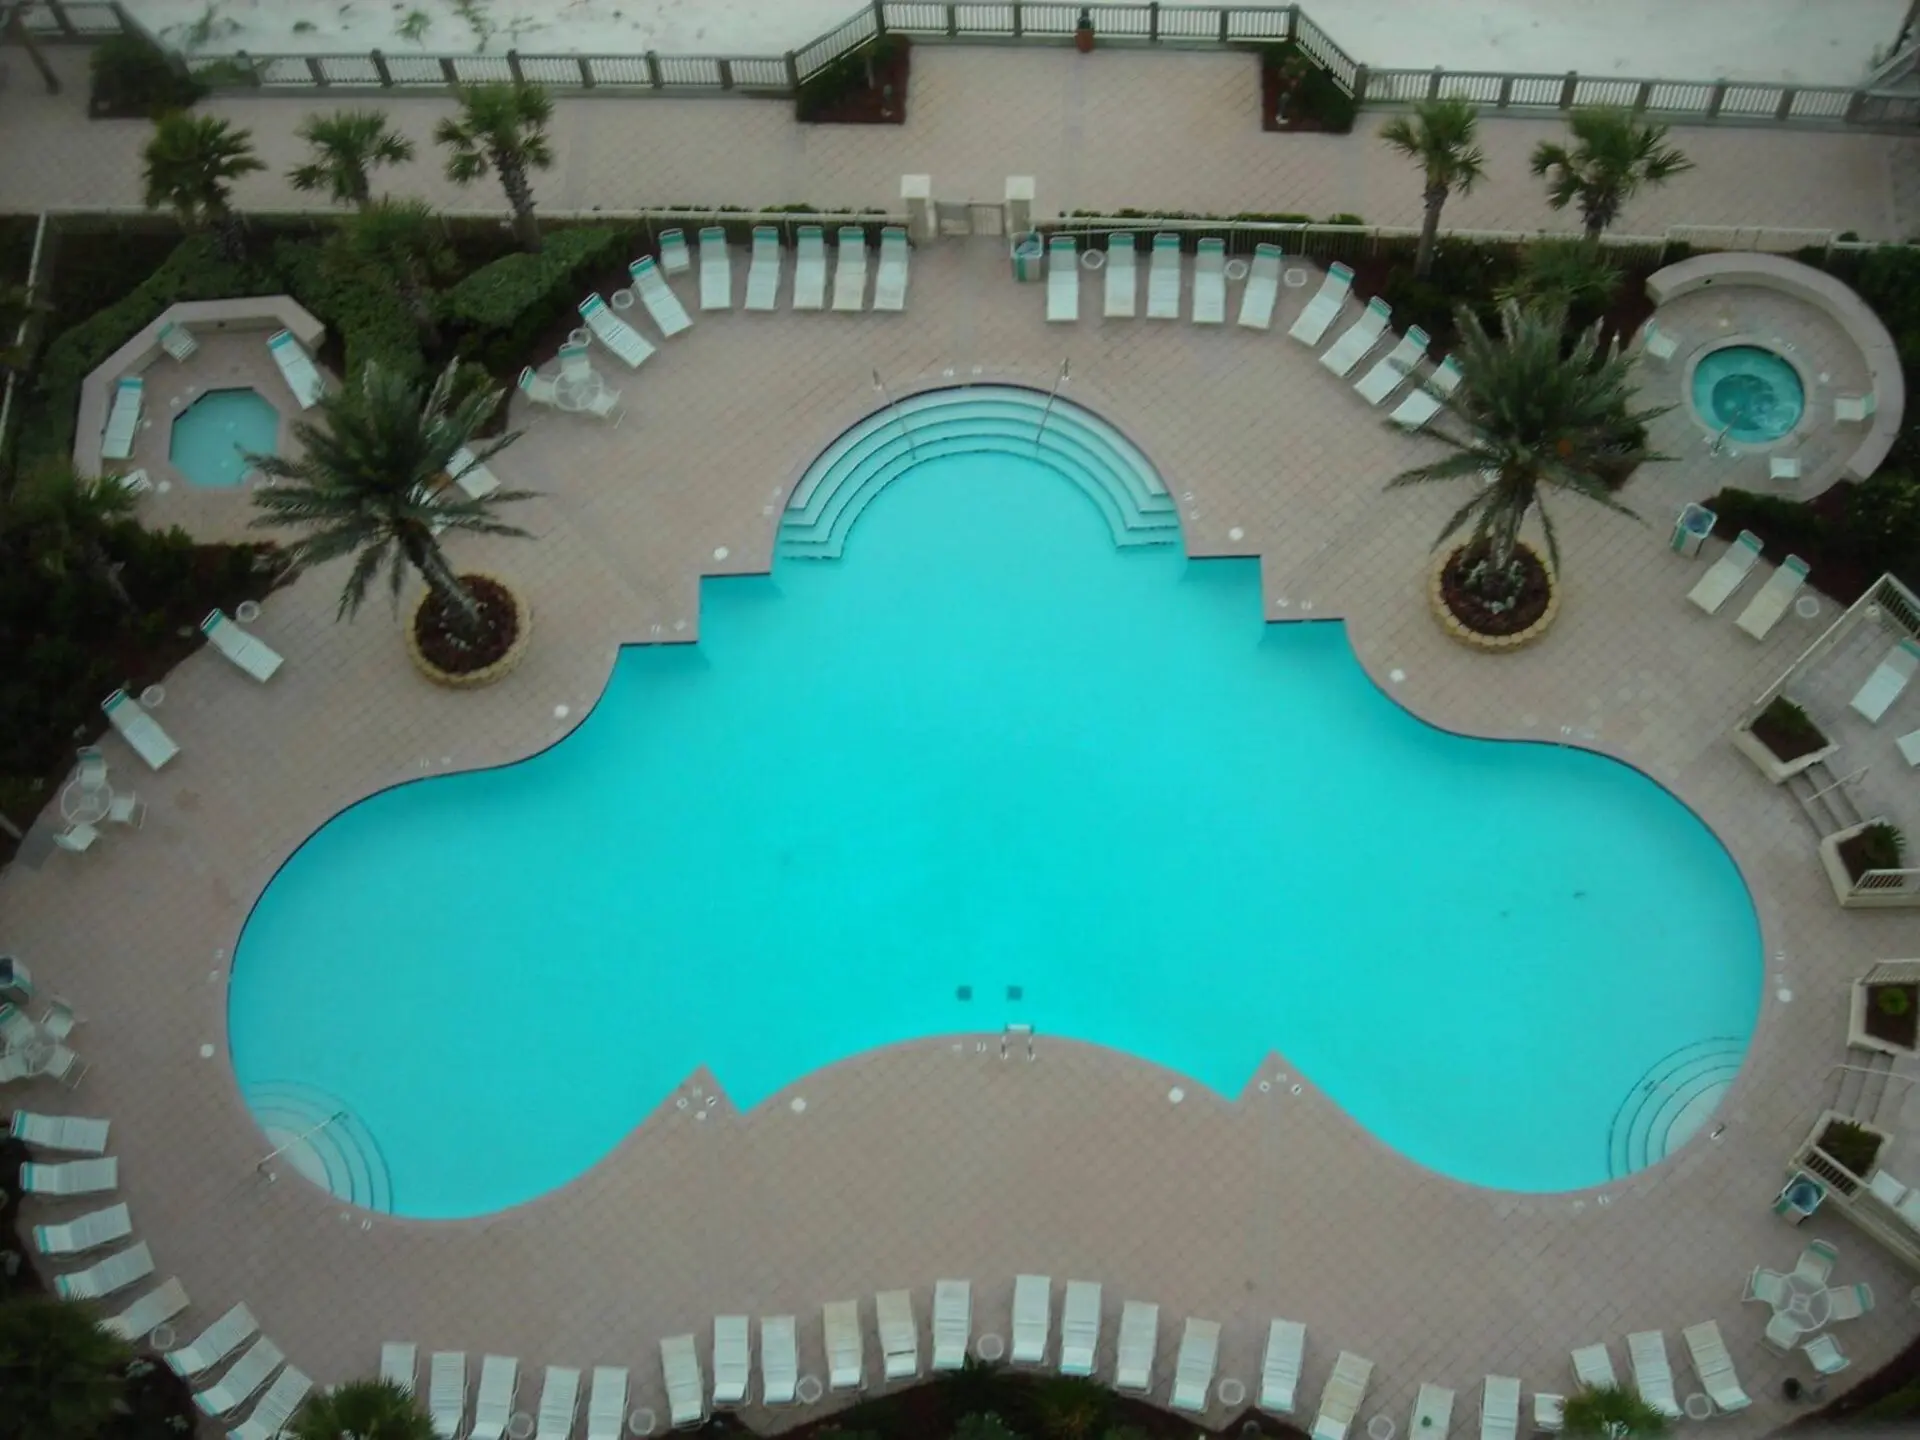 A pool with many chairs and trees in the background